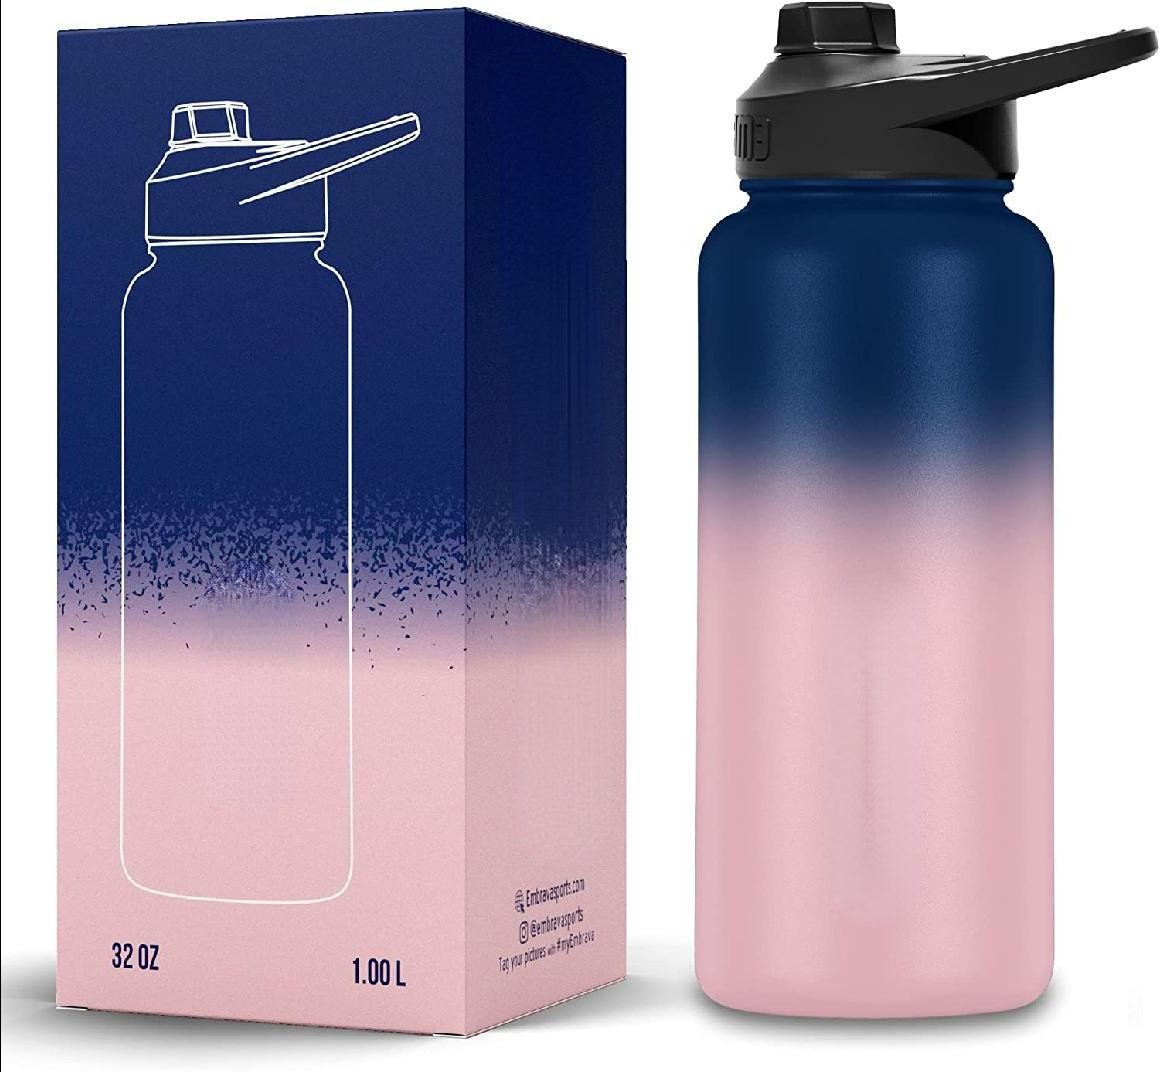 THE GYM KEG 74Oz Water Bottle With Carry Handle - Blue